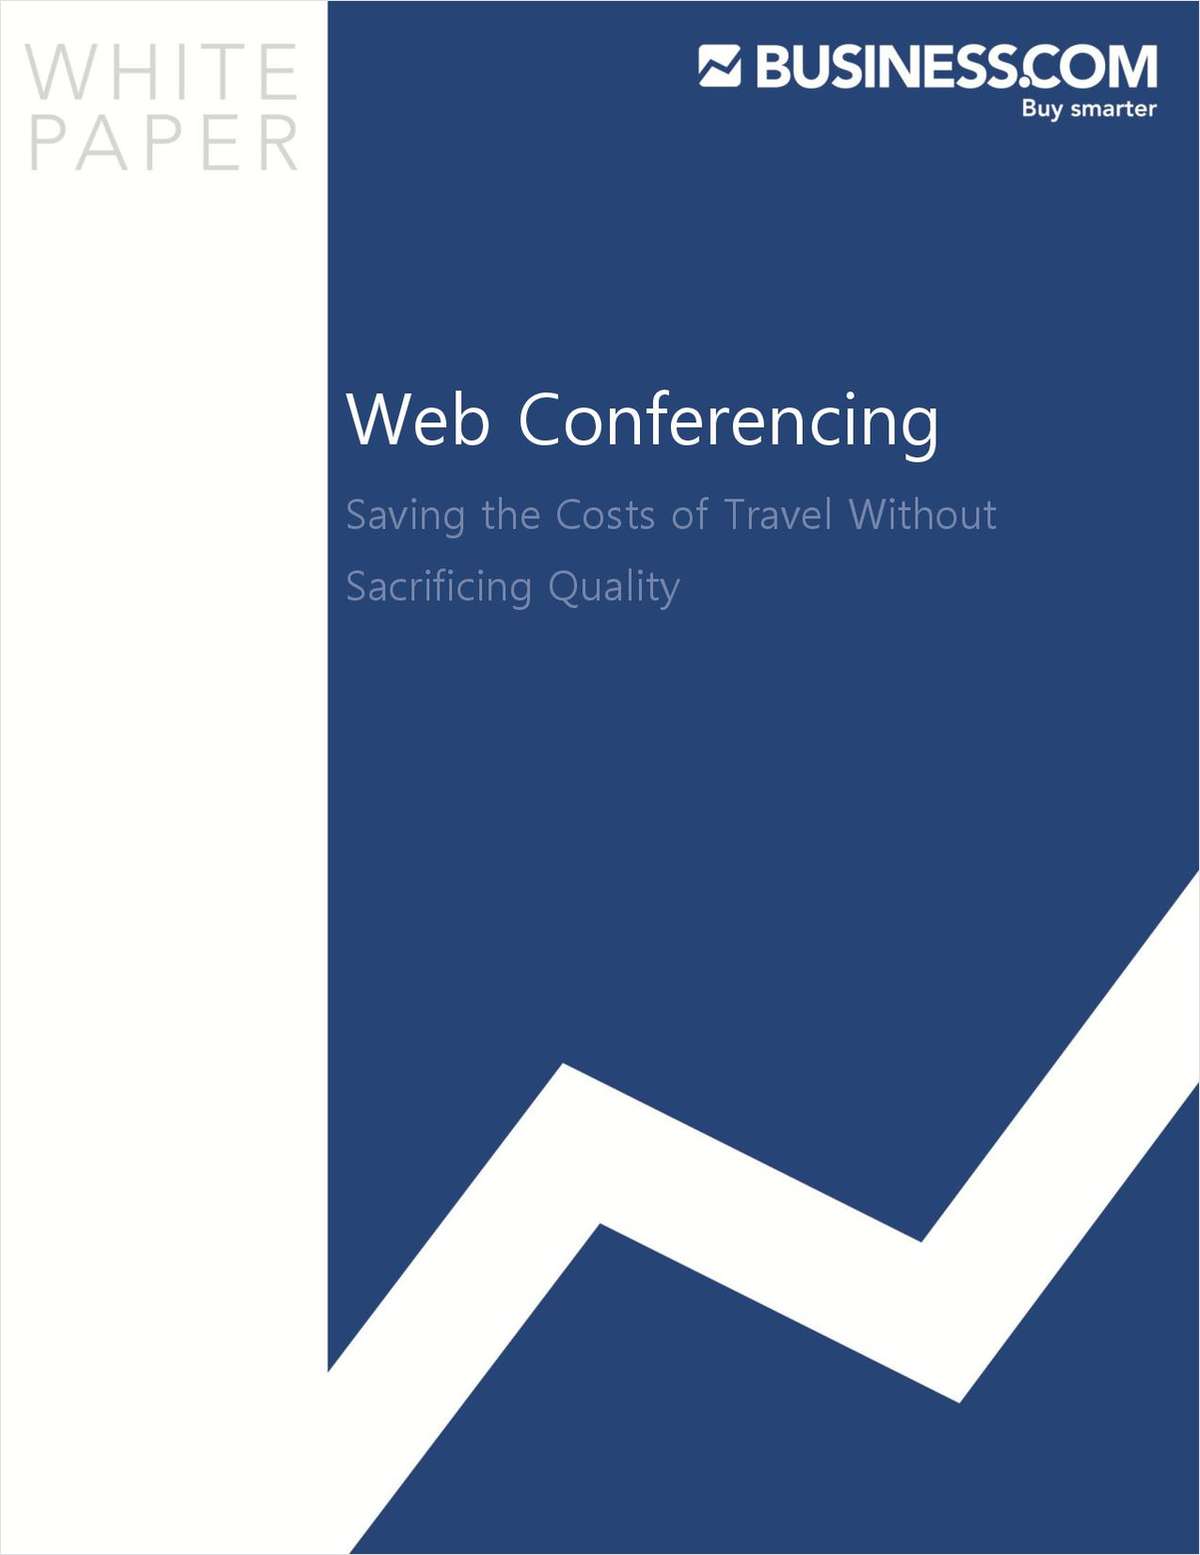 Web Conferencing:  Saving the Costs of Travel Without Sacrificing Quality